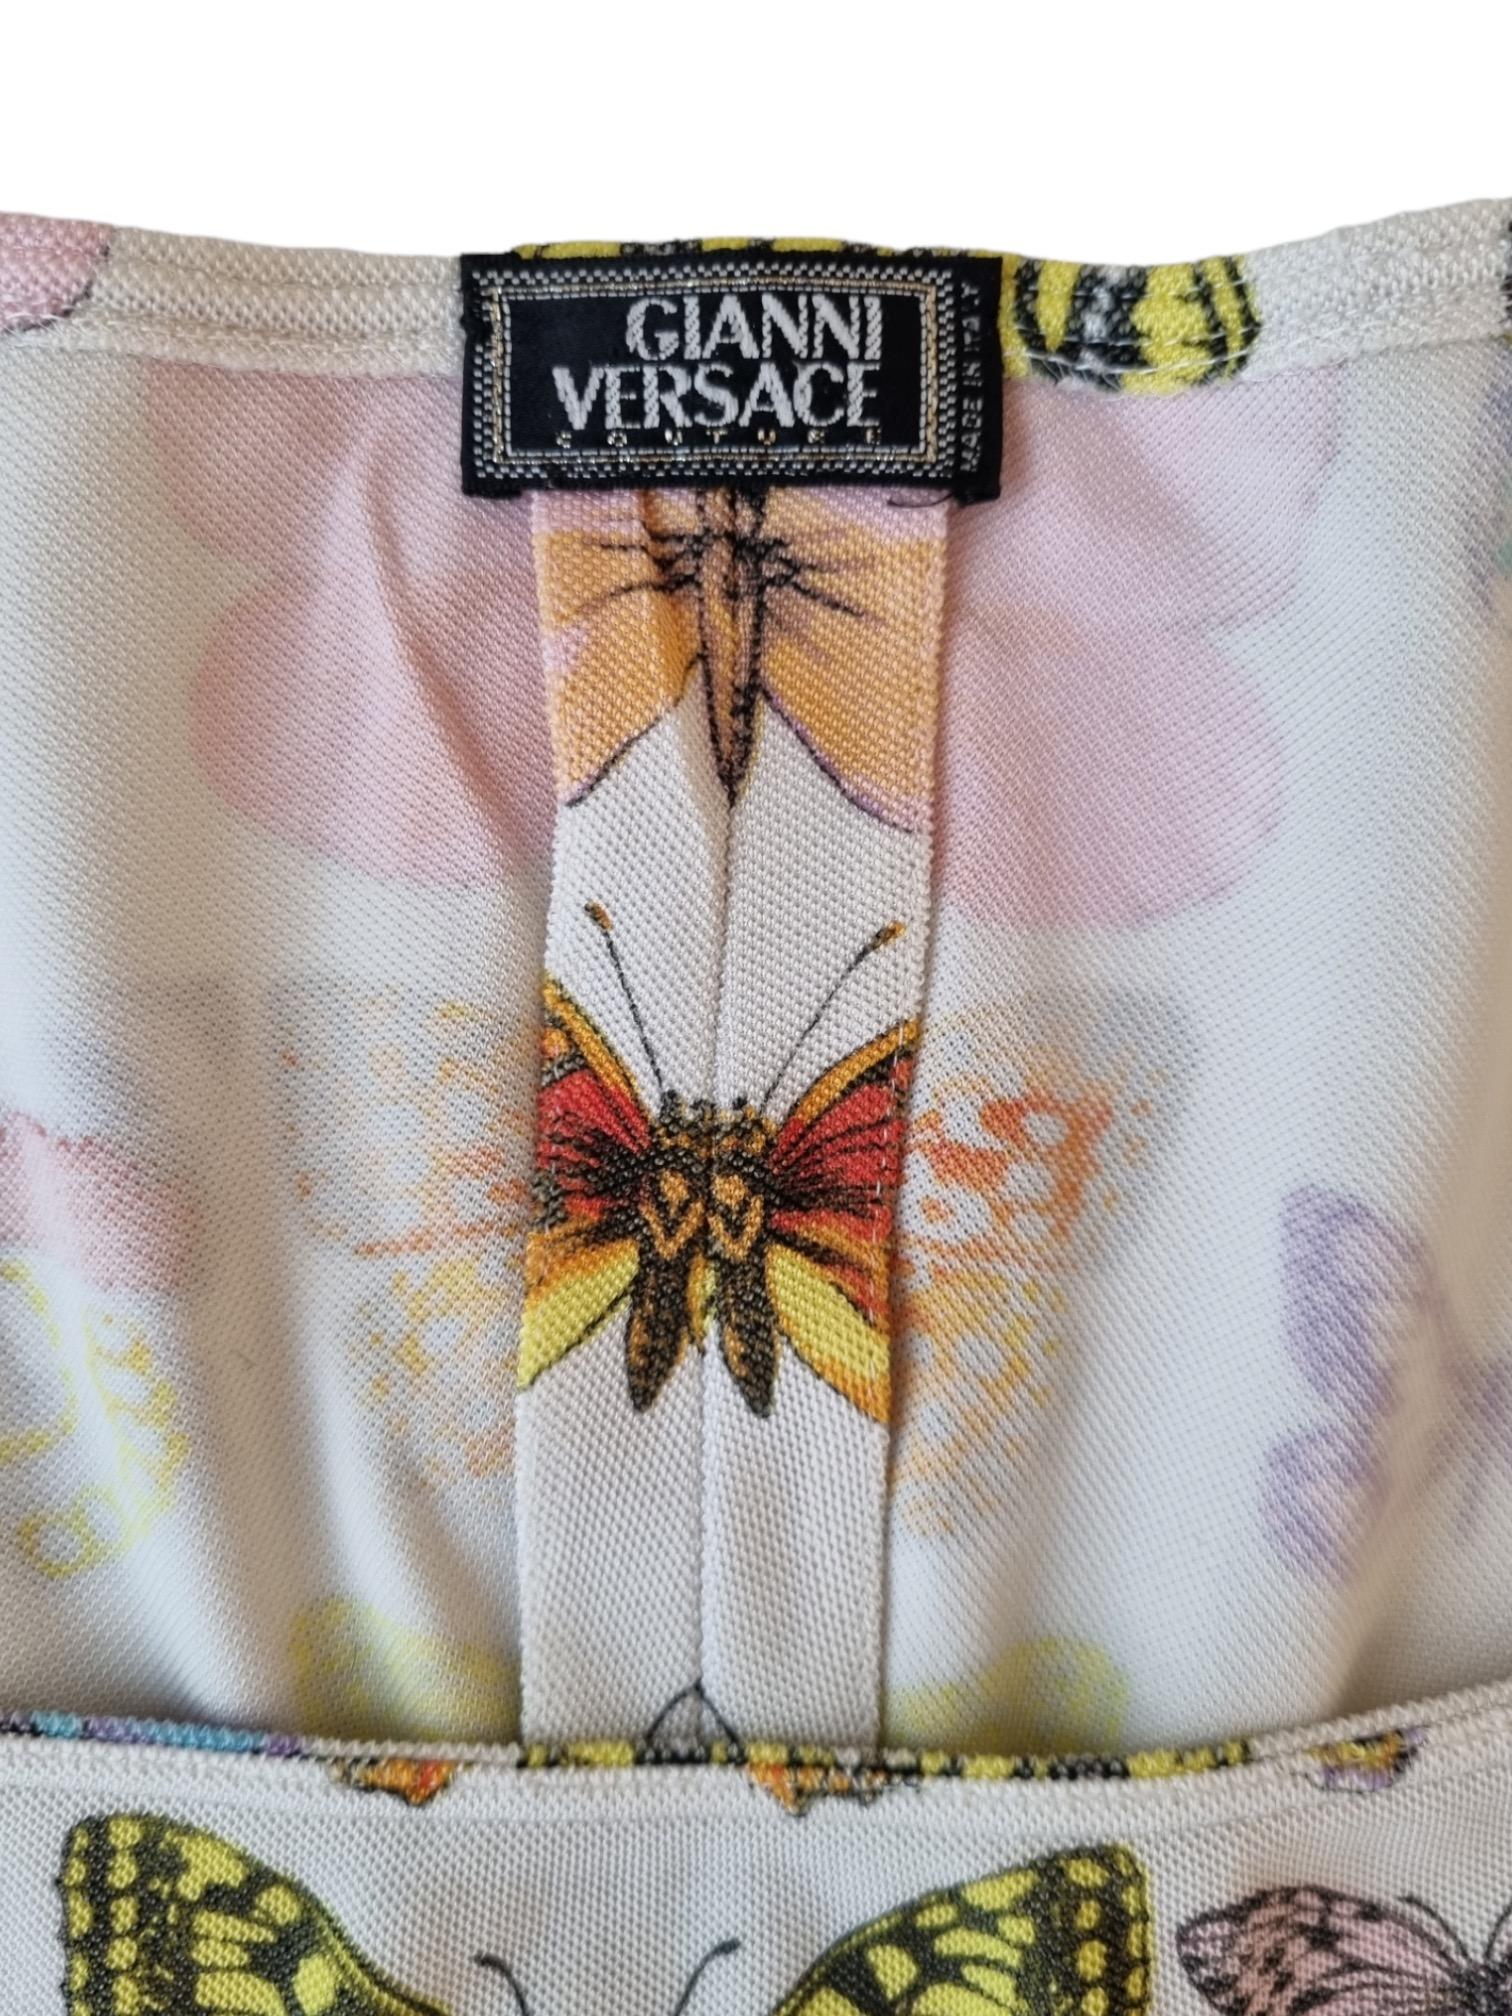 Iconic and super rare dress in one of Versaces most iconic prints ever - the butterfly print. This dress in the white butterfly print was worn on the runway for the Versace S/S 1995 show. The print has been replicated numerous times for the house